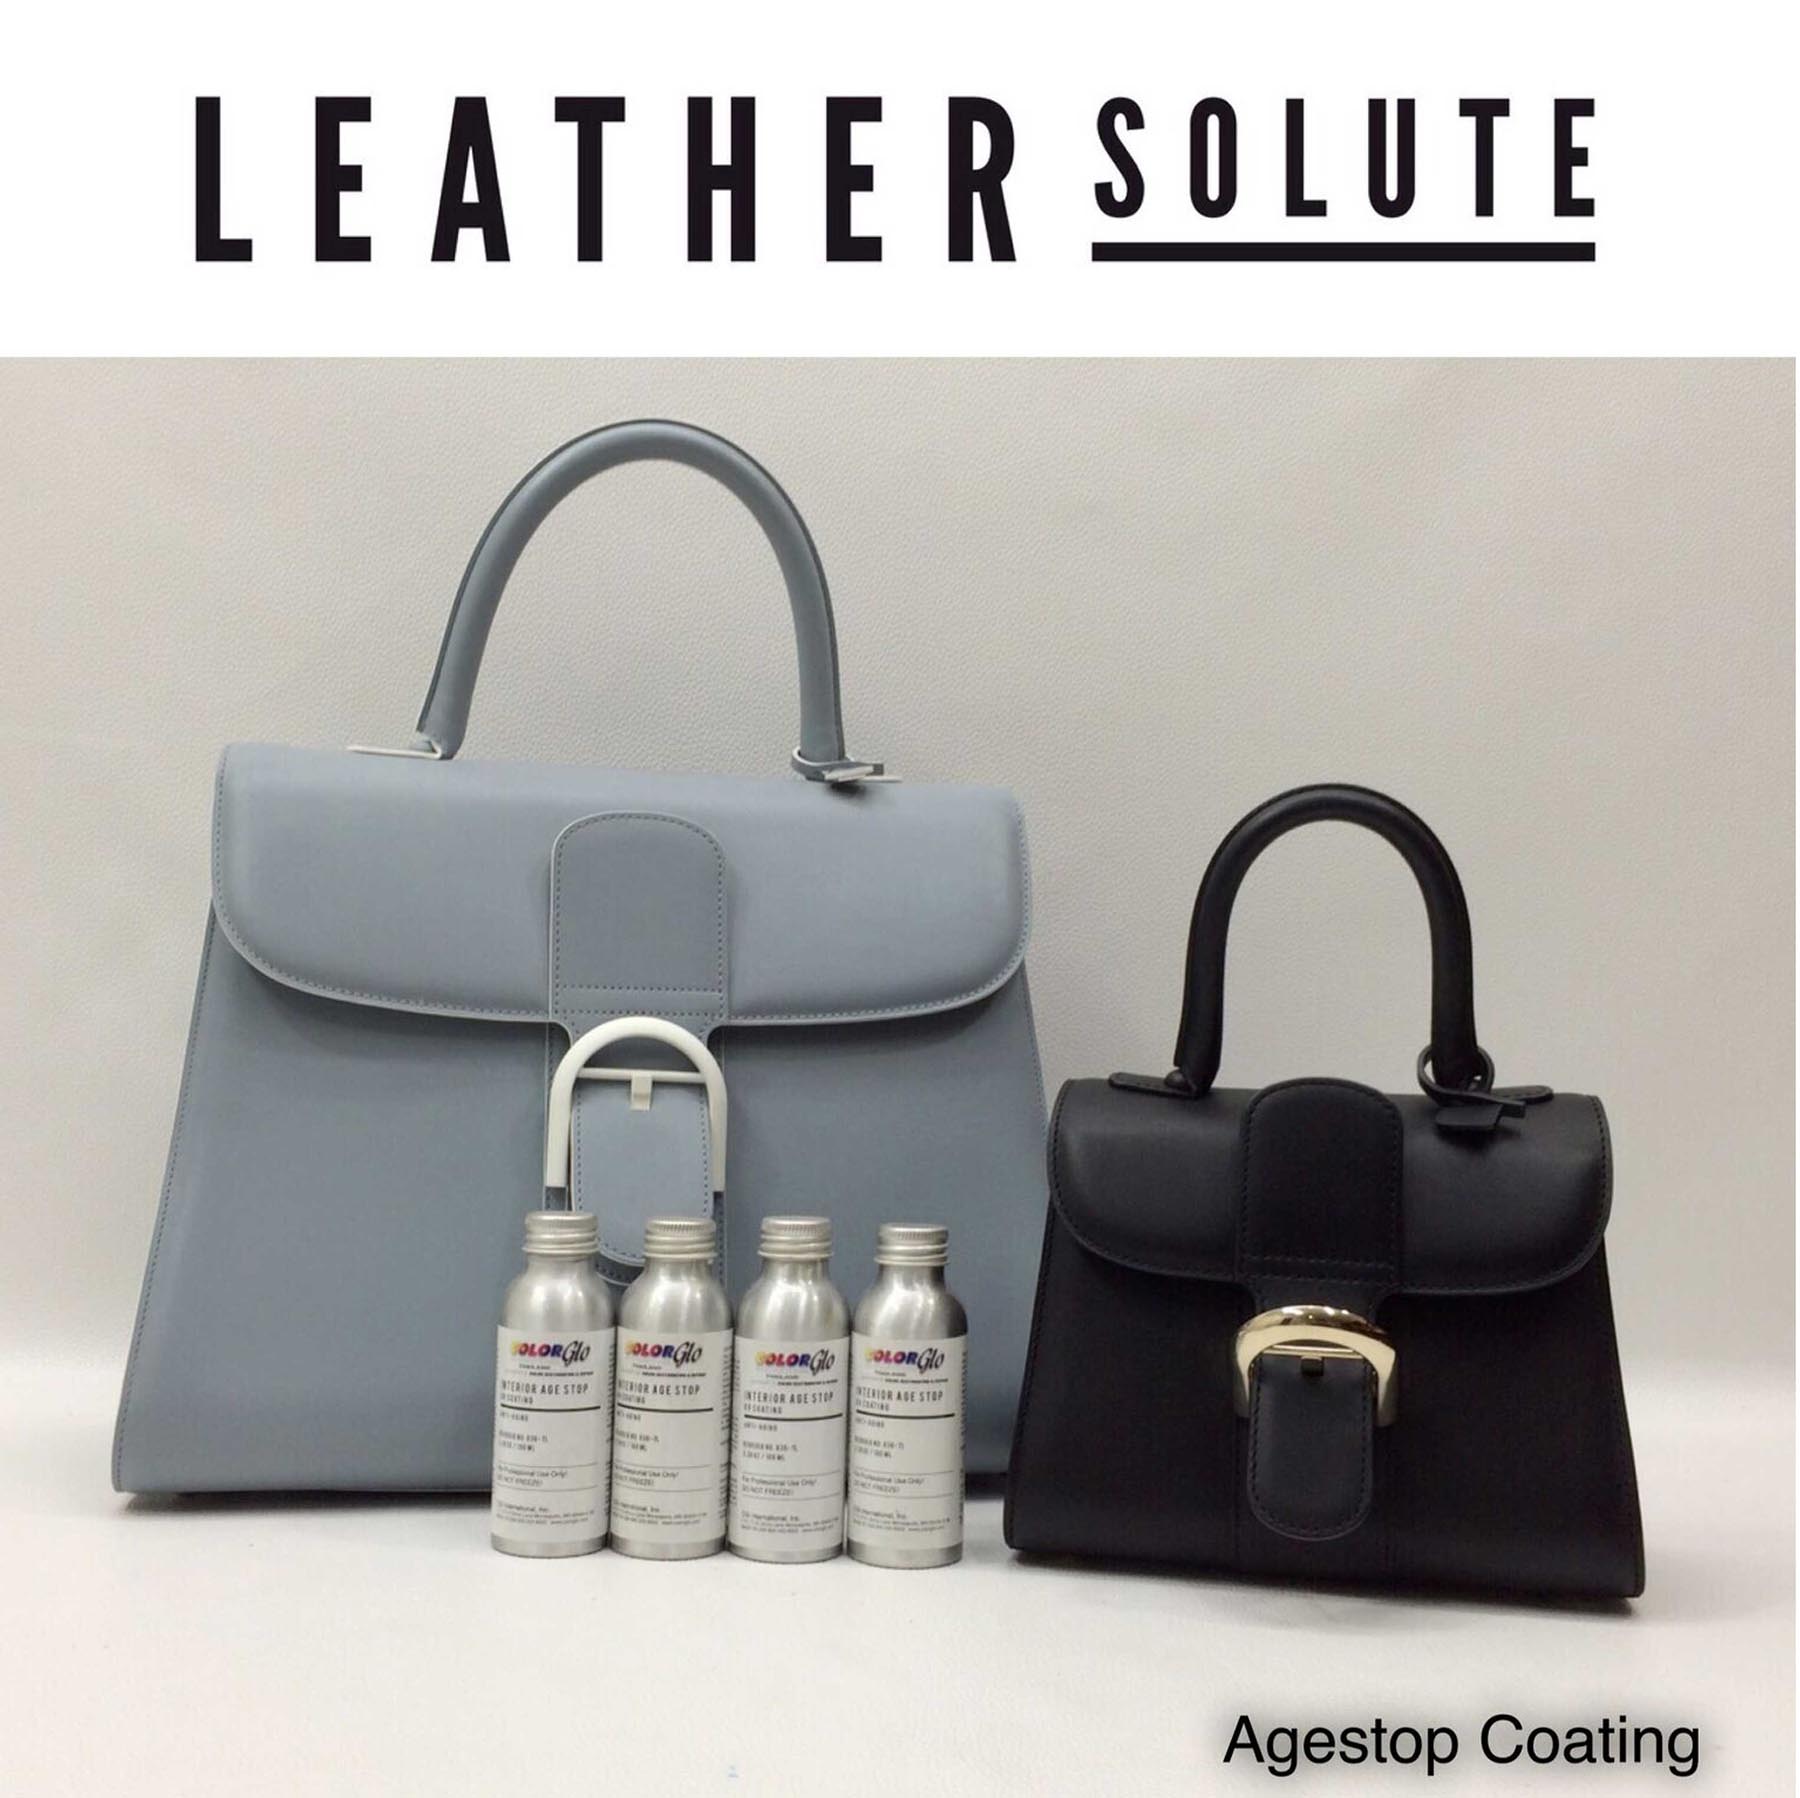 //leathersolute.co.th/wp-content/uploads/2018/11/age-stop-coating-3.jpg